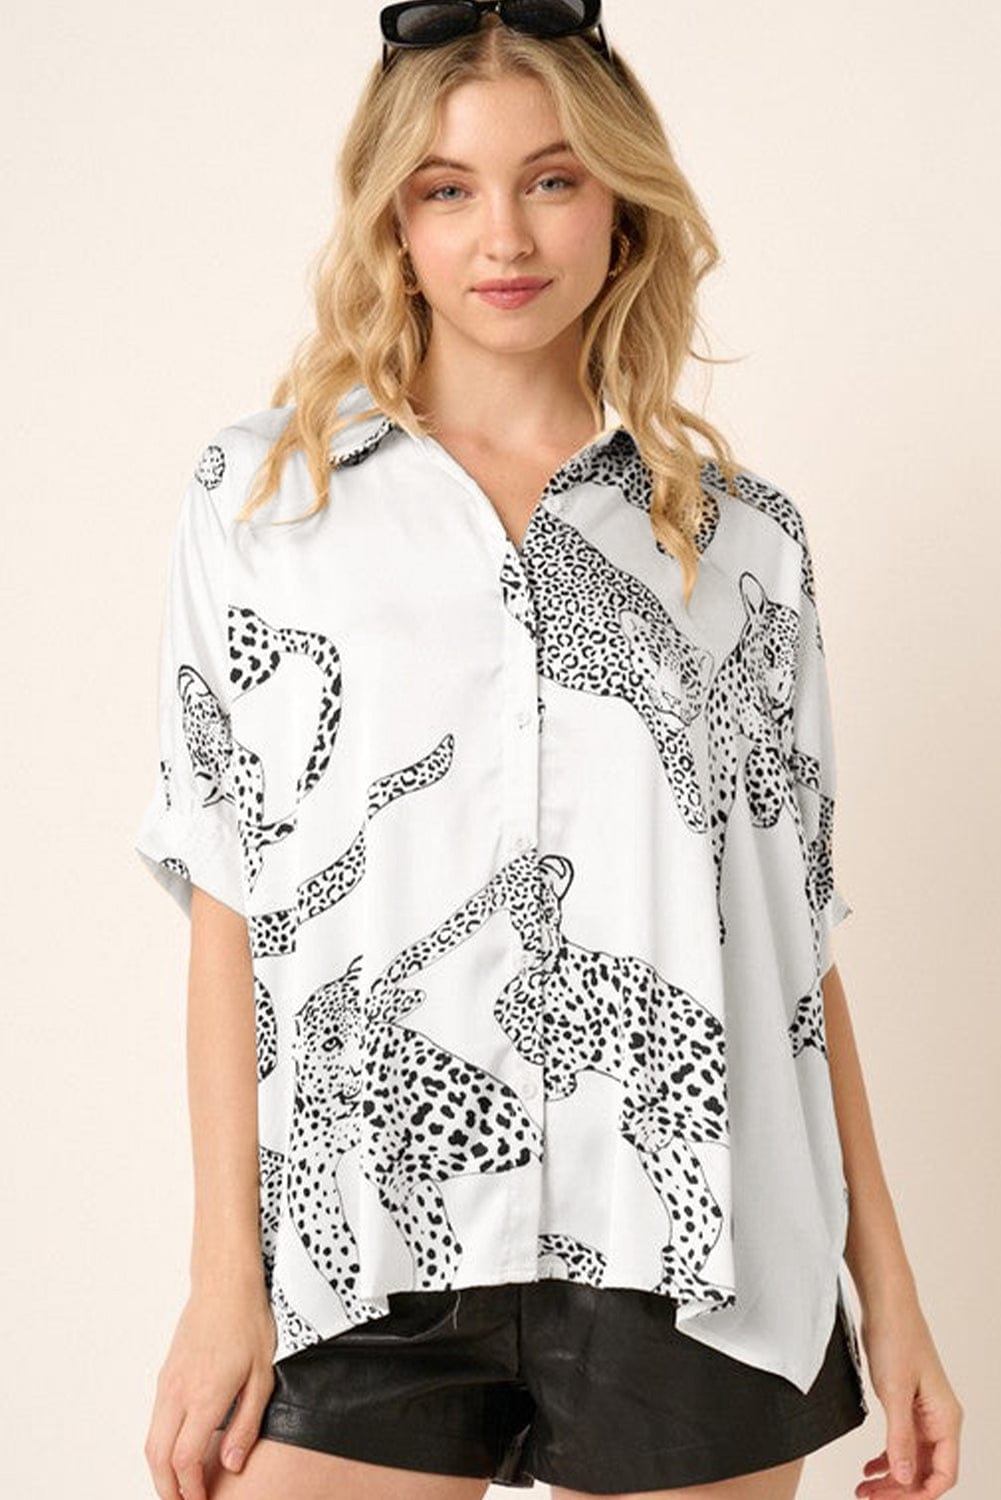 The802Gypsy  Women's Tops Traveling Gypsy  Cheetah Print Buttoned Shirt